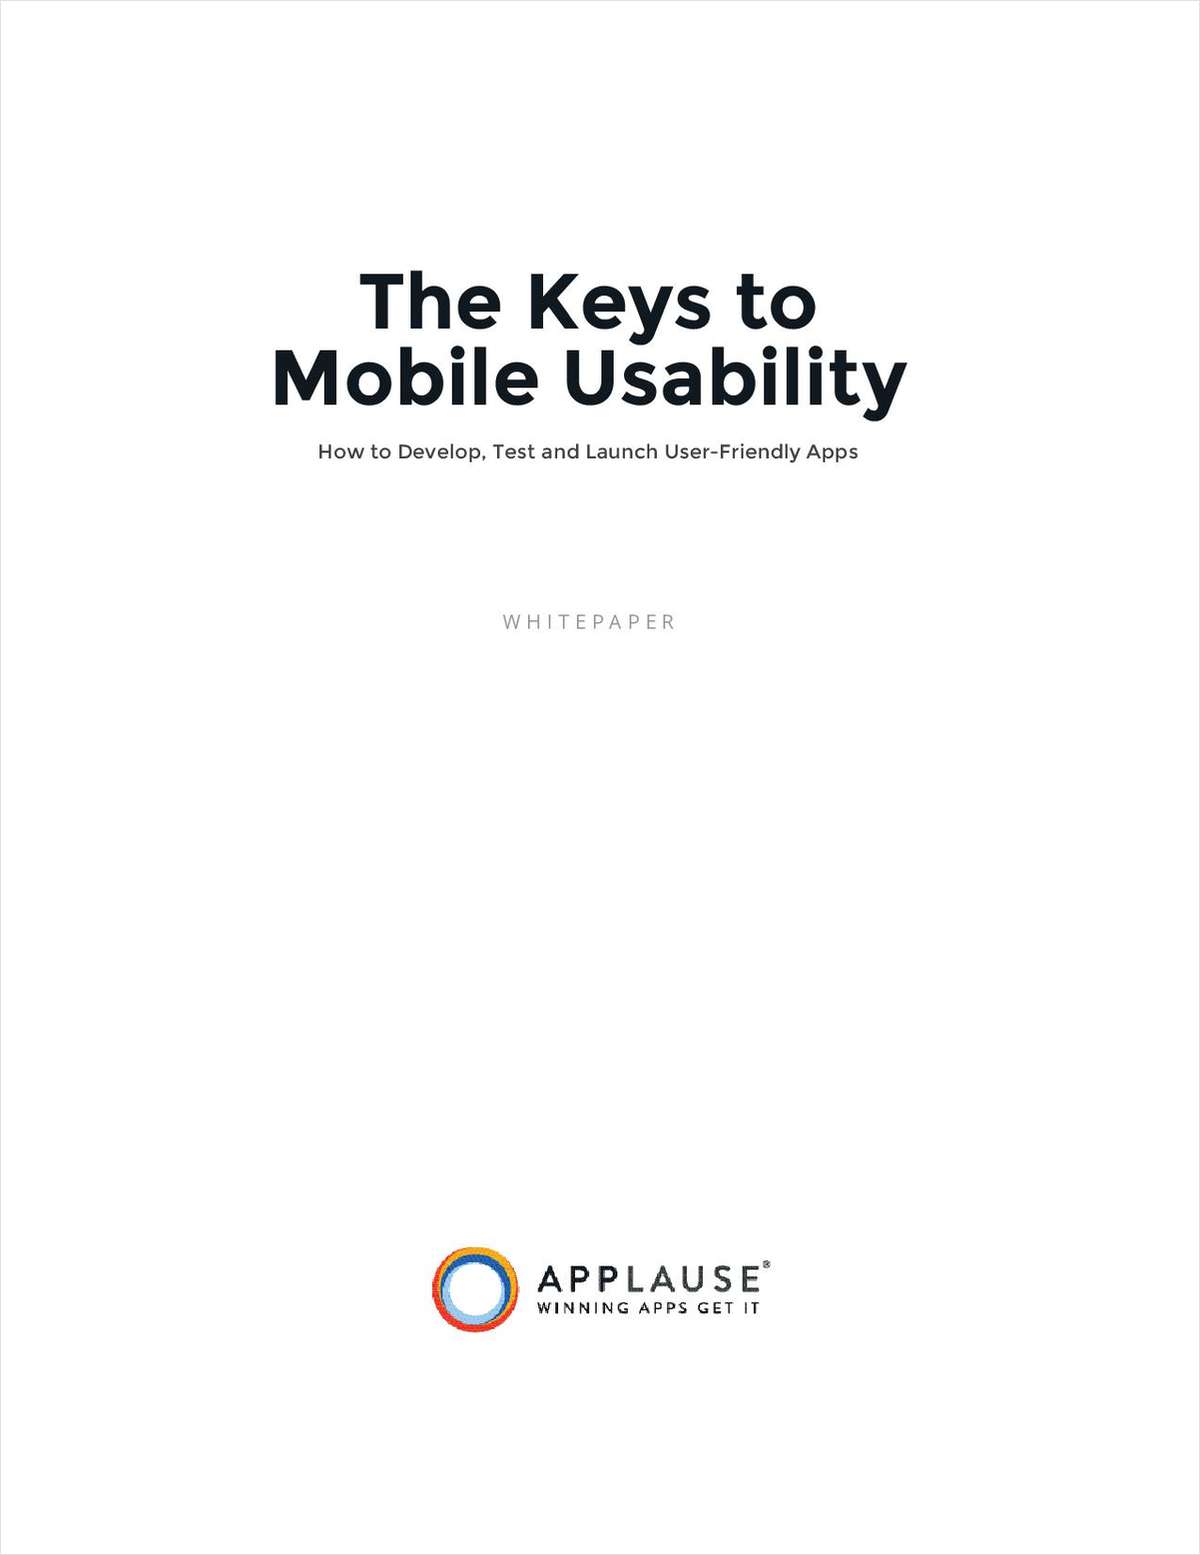 The Keys to Mobile Usability